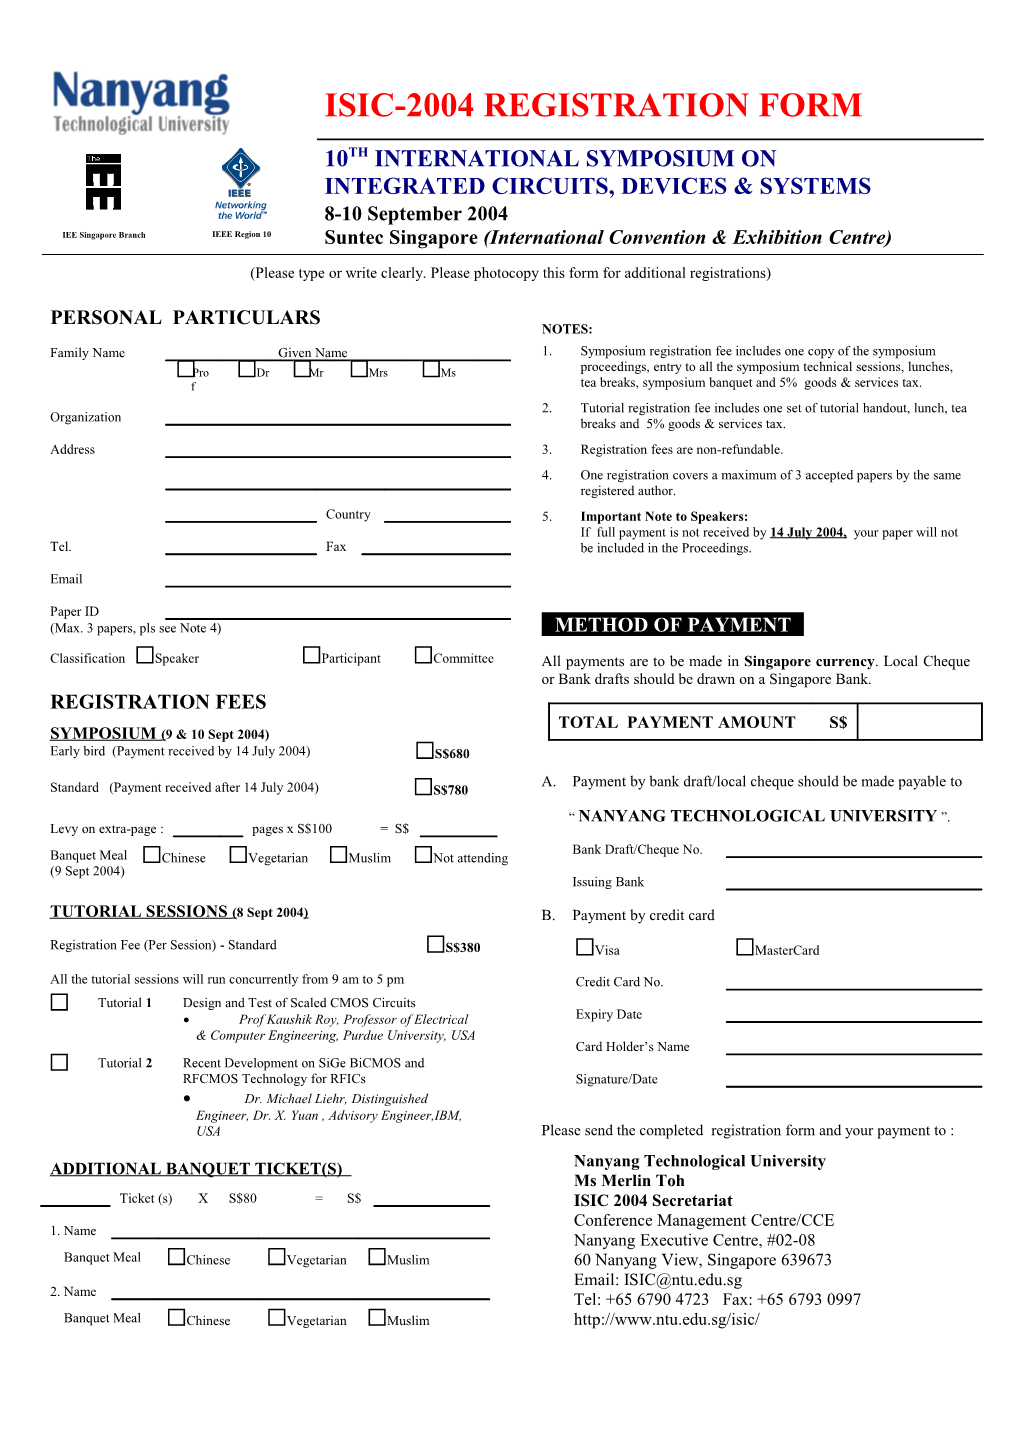 Please Type Or Write Clearly. Please Photocopy This Form for Additional Registrations